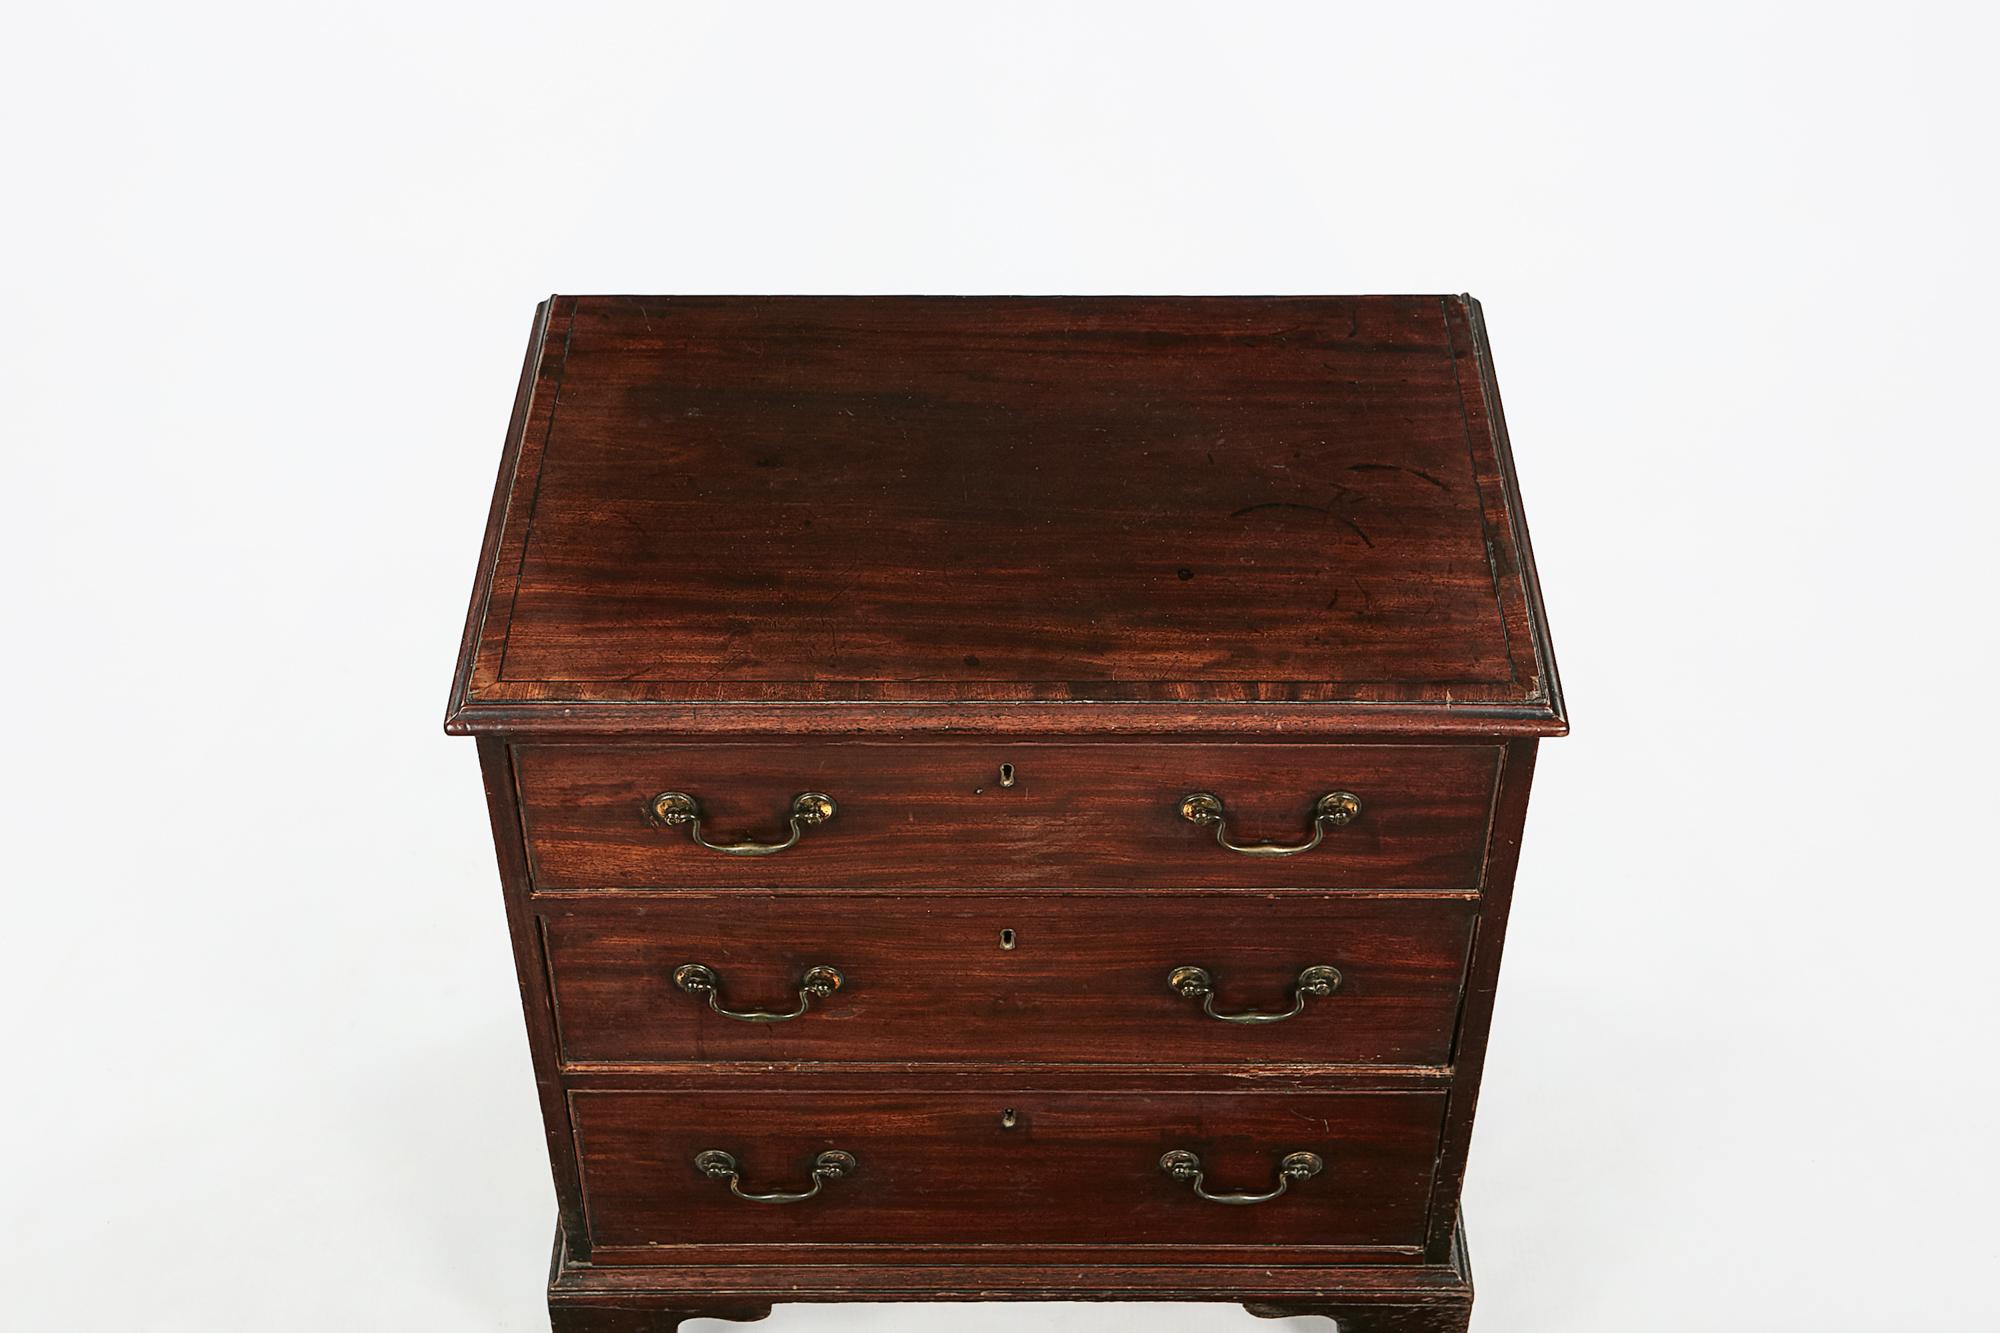 18th century George II crossbanded line inlaid mahogany chest of drawers, the moulded top raised over three graduated long cockbeaded drawers with brass pulls and escutcheons terminating on ogee bracket feet.